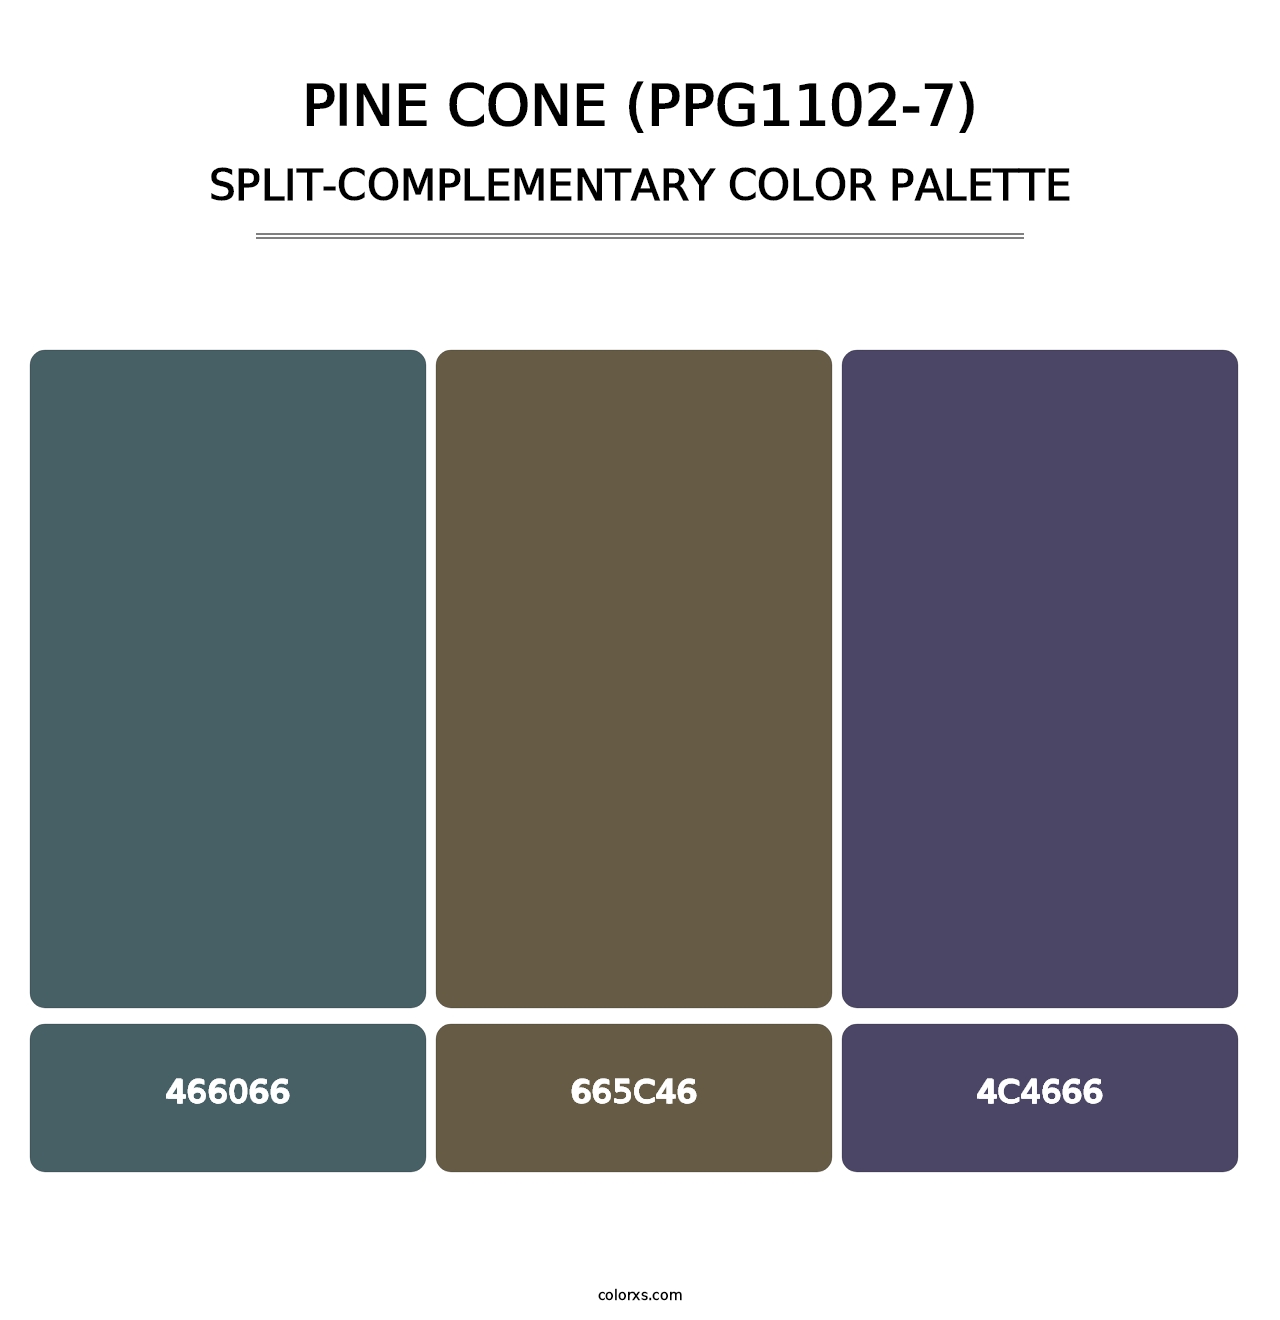 Pine Cone (PPG1102-7) - Split-Complementary Color Palette